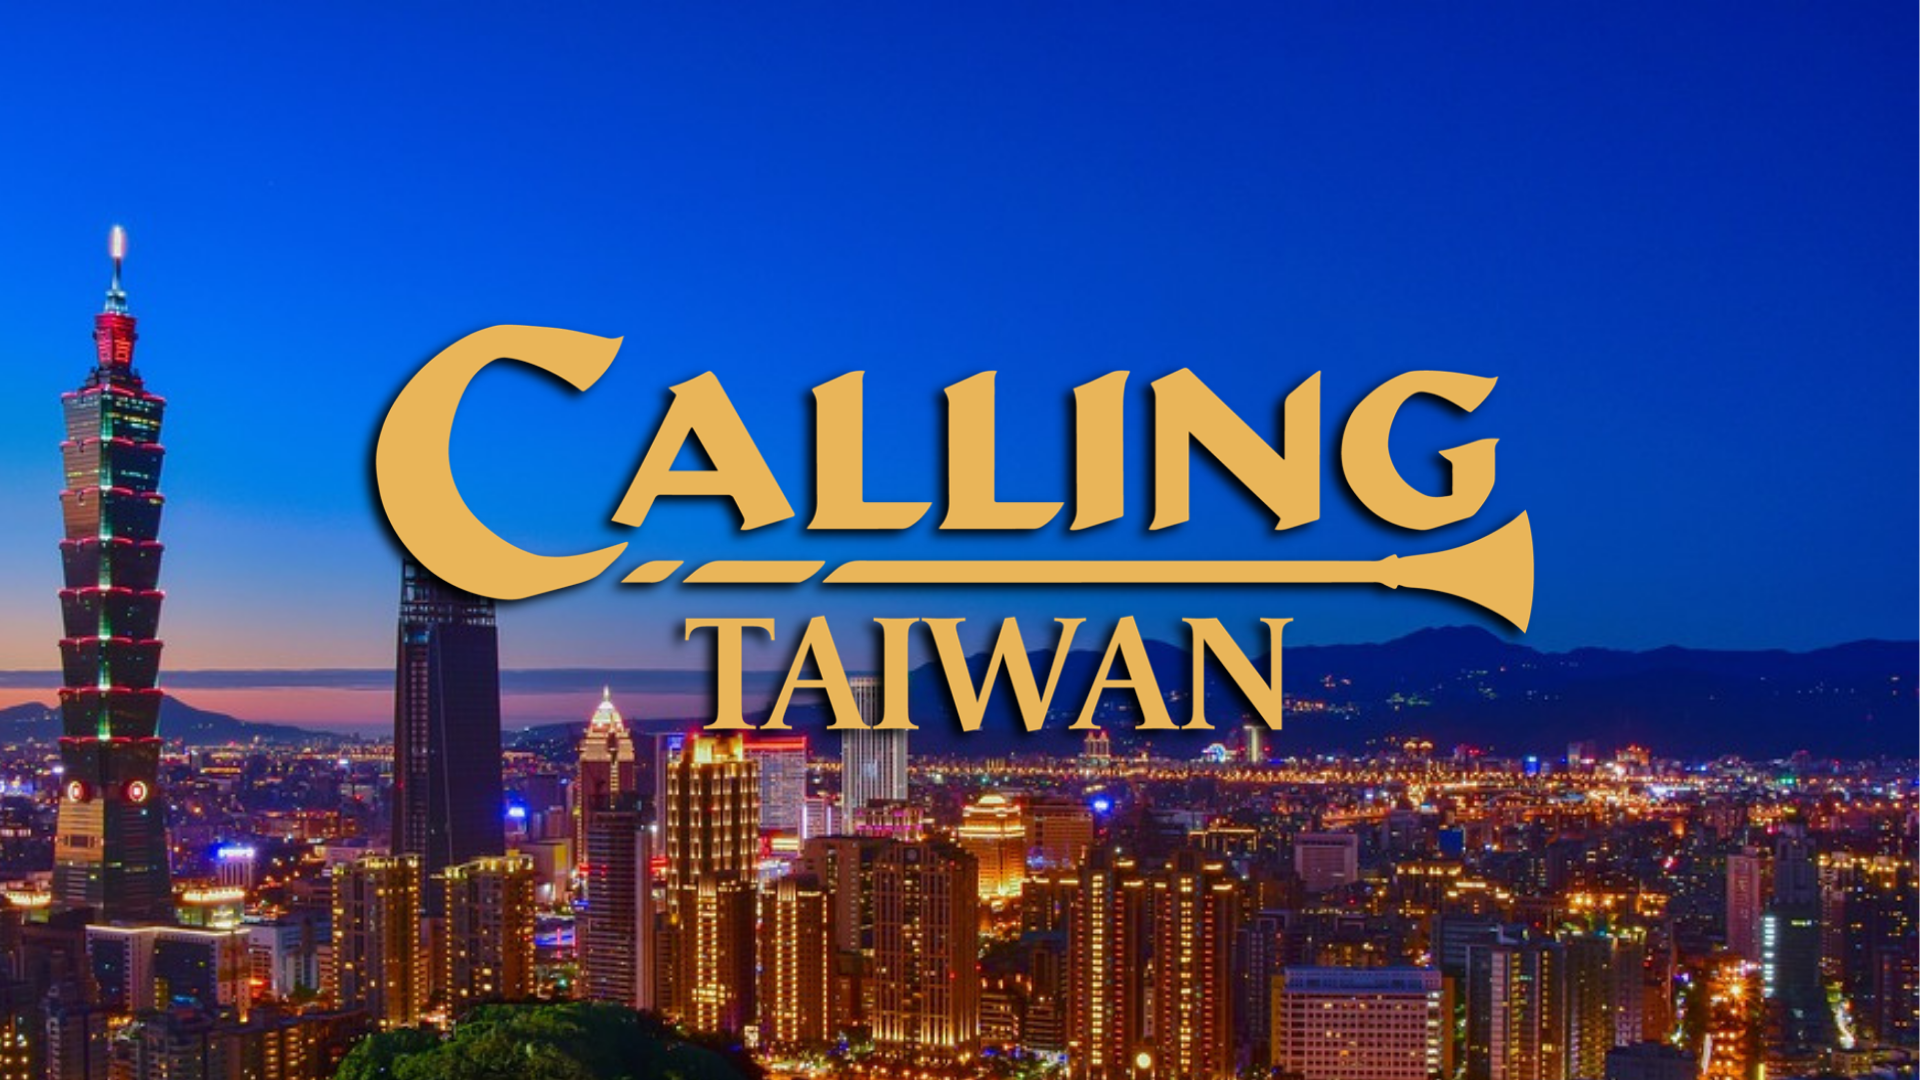 Calling Taiwan - city scape